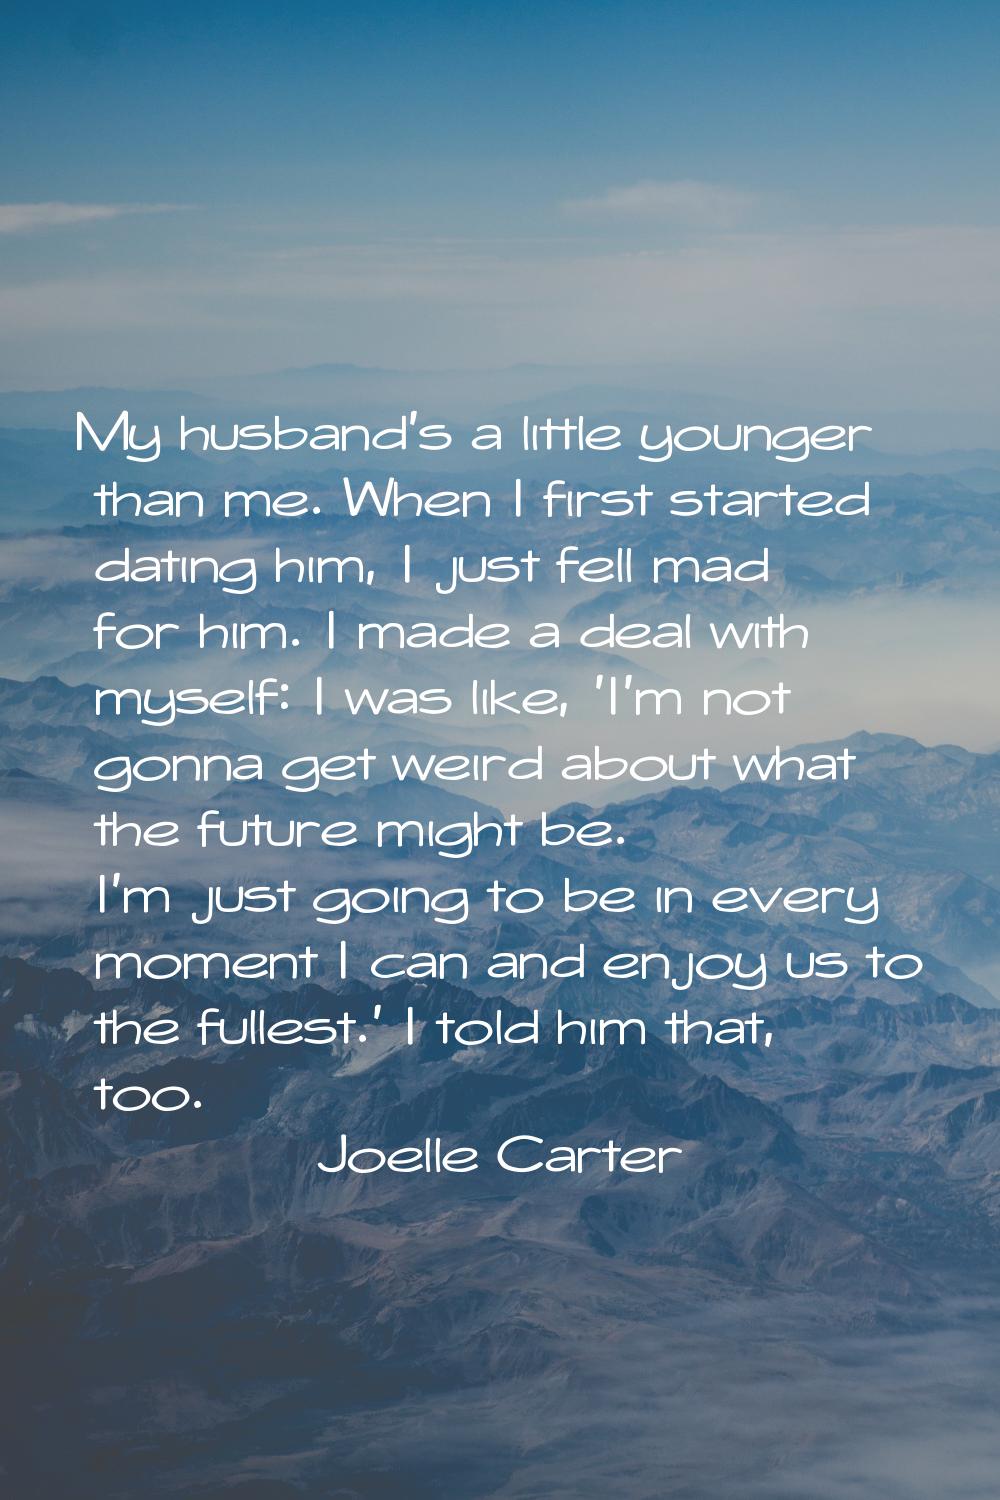 My husband's a little younger than me. When I first started dating him, I just fell mad for him. I 